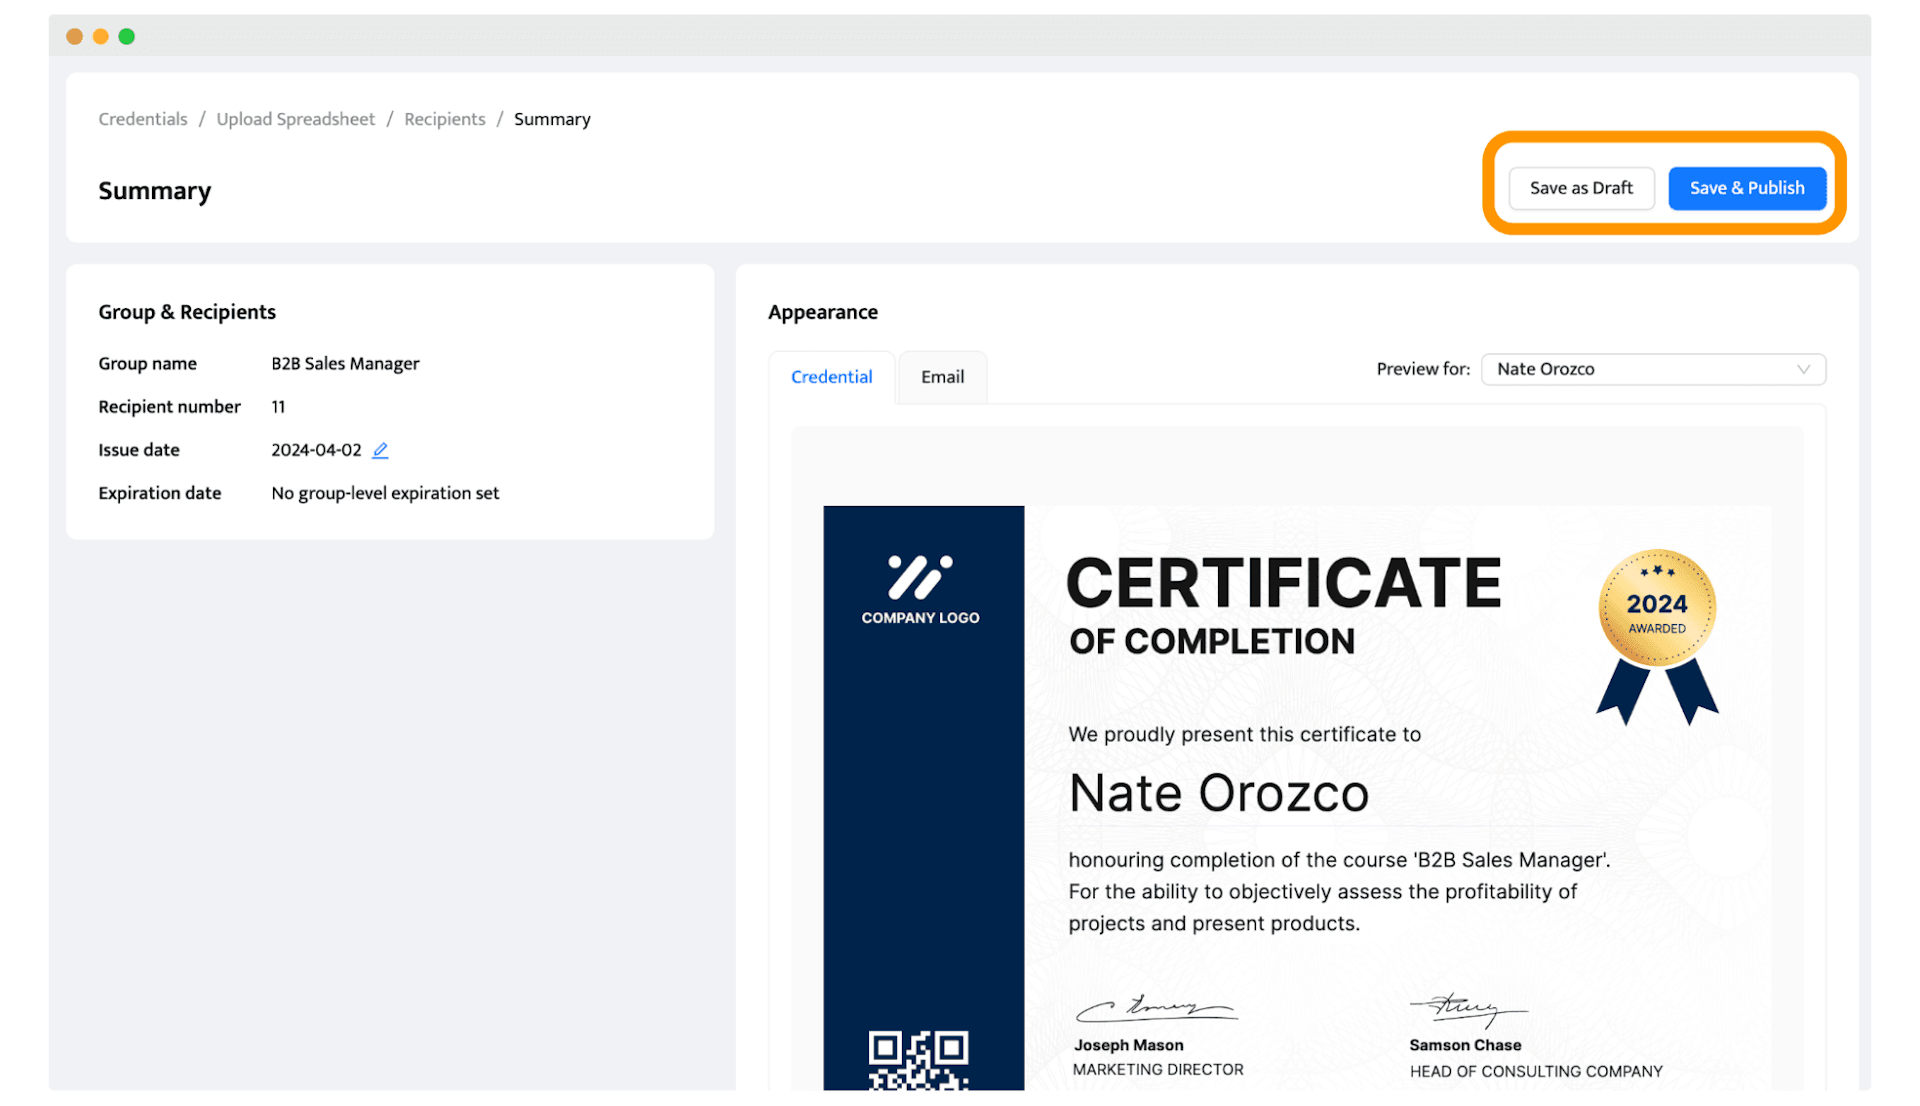 Saving the certificate design and sending them out.